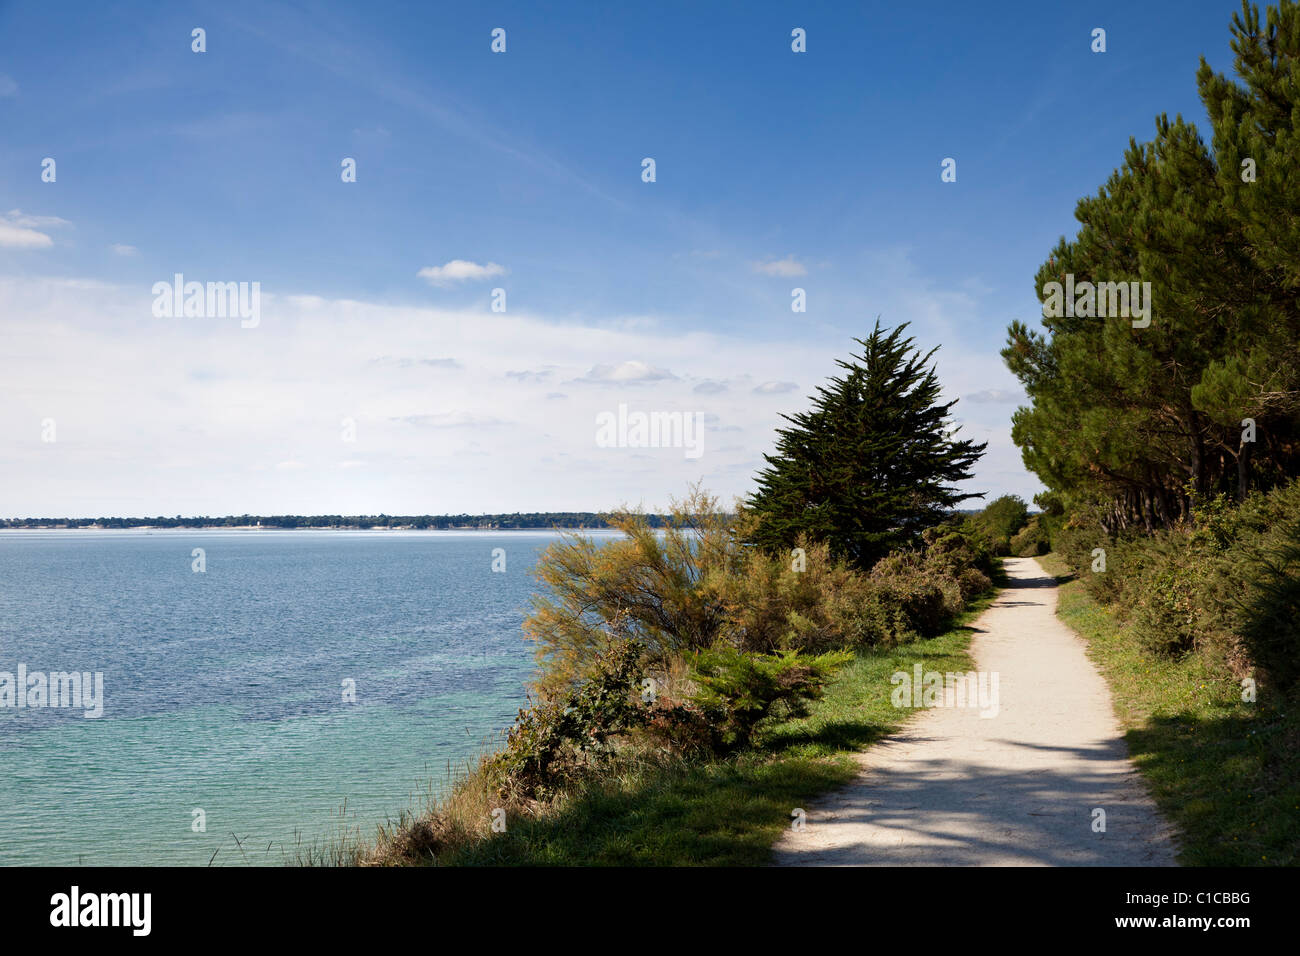 Coast path pathway, Brittany, France, Europe Stock Photo